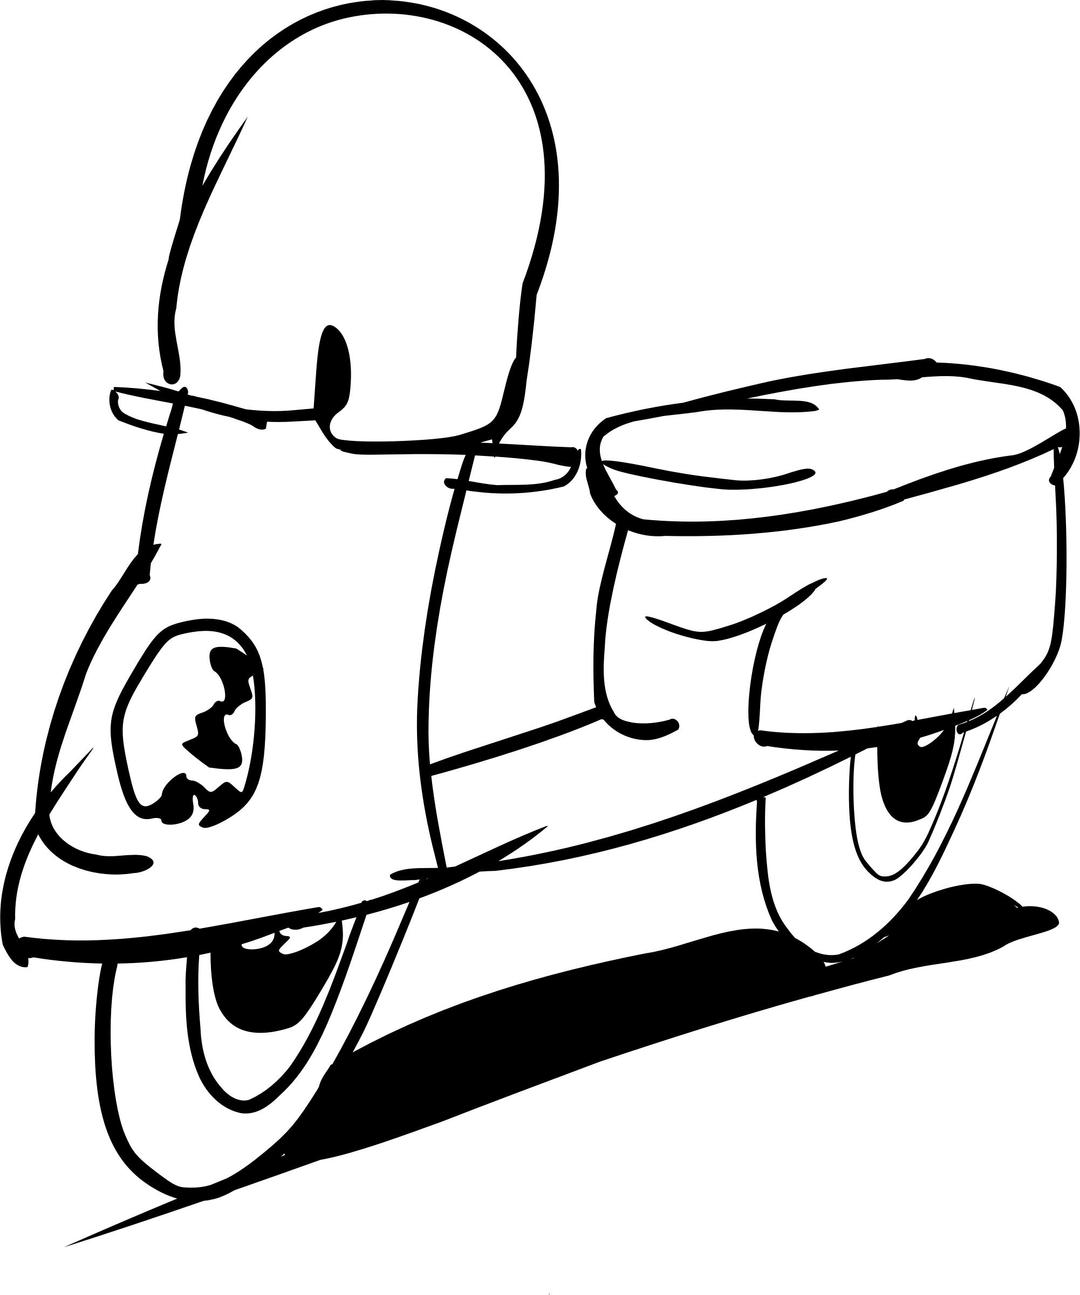 Scooter line drawing png transparent